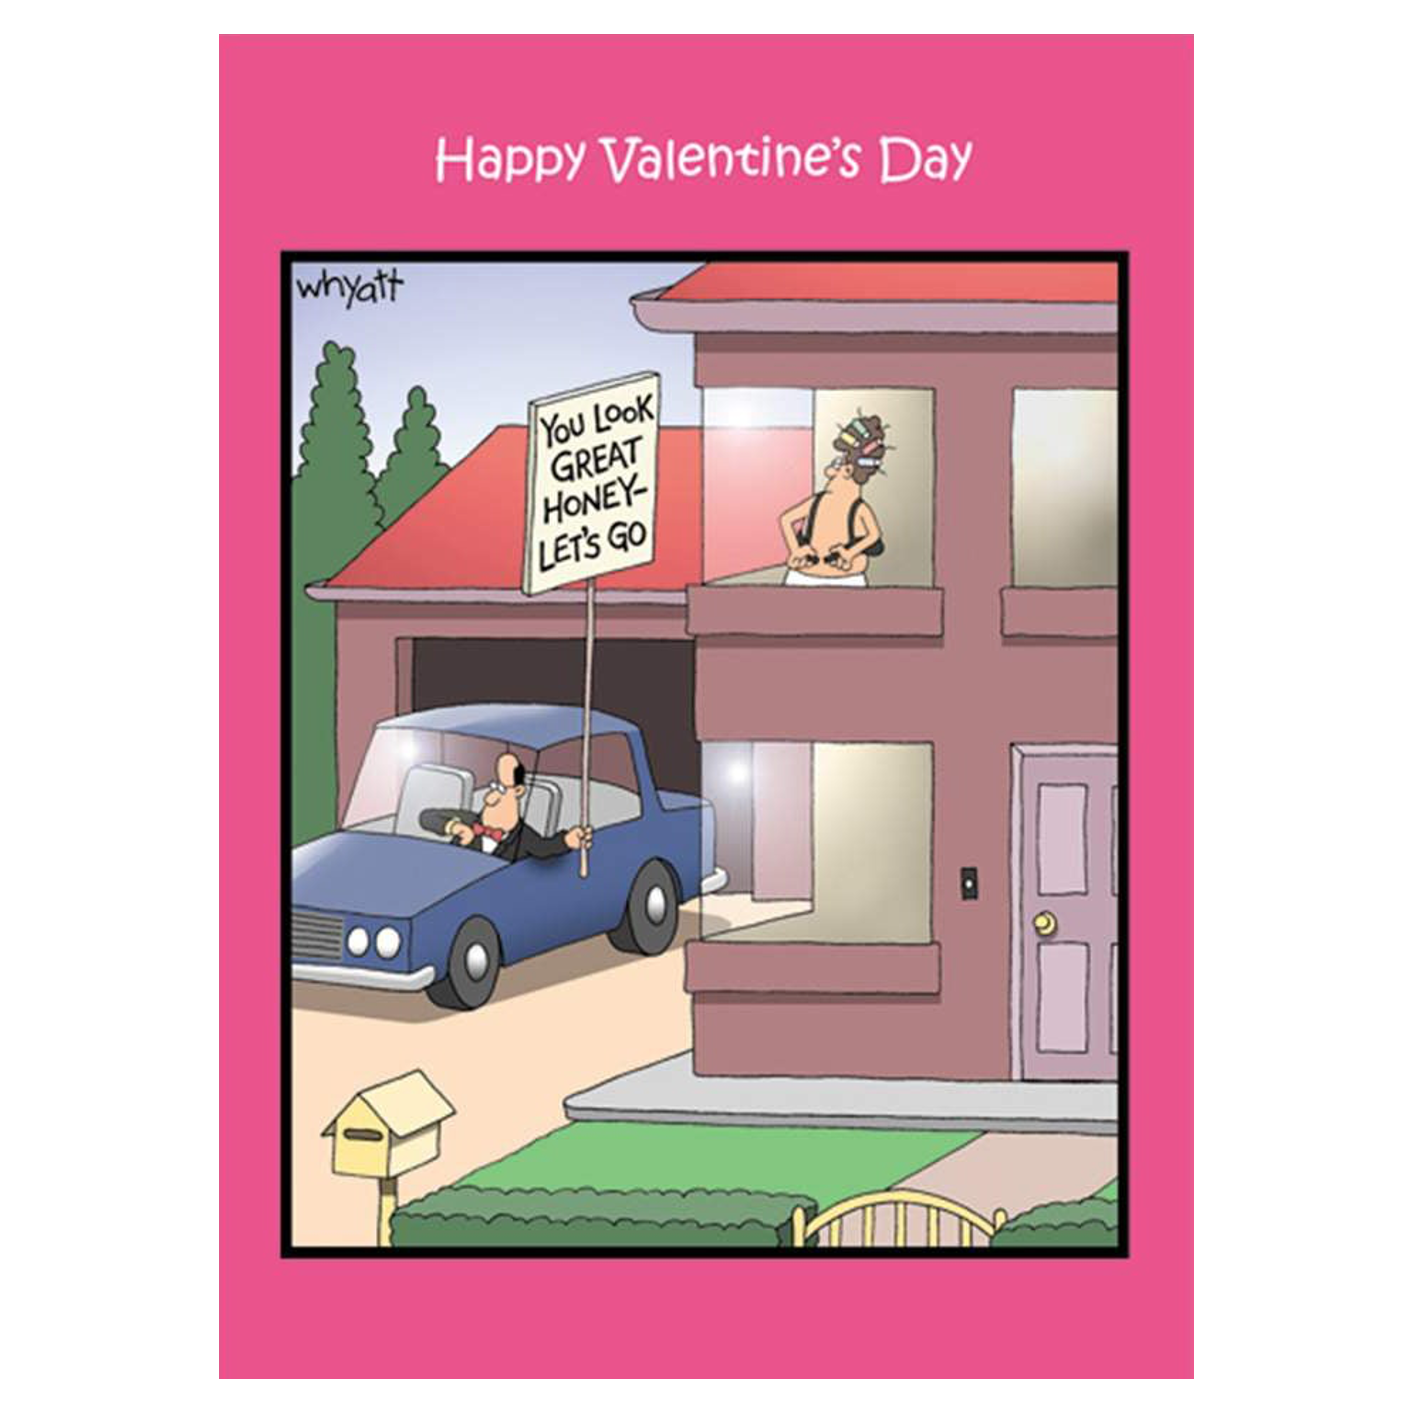 You Look Great Honey-Let's Go Valentine's Day Card